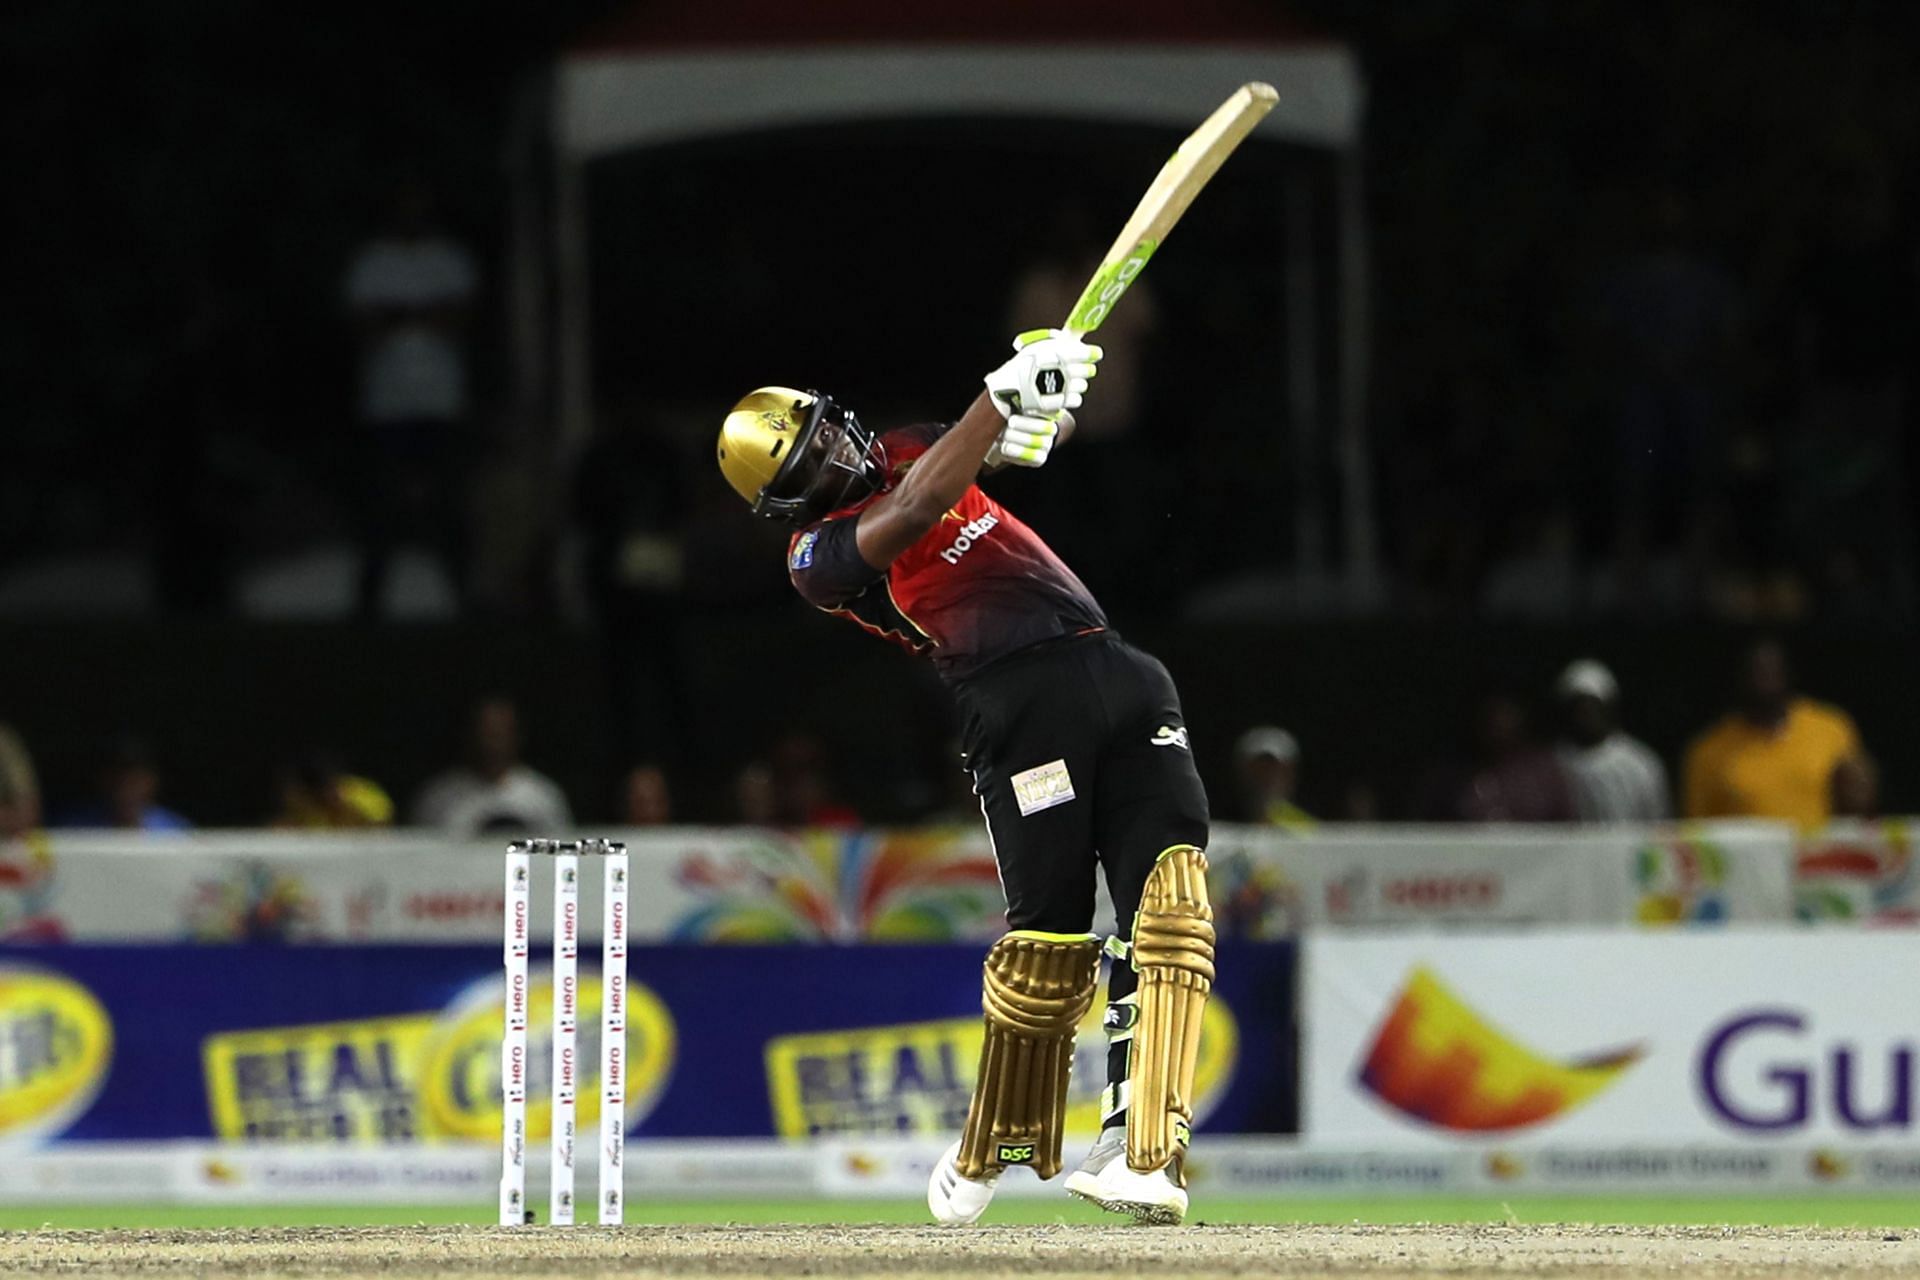 Dwayne Bravo in action during the 2018 Hero Caribbean Premier League.